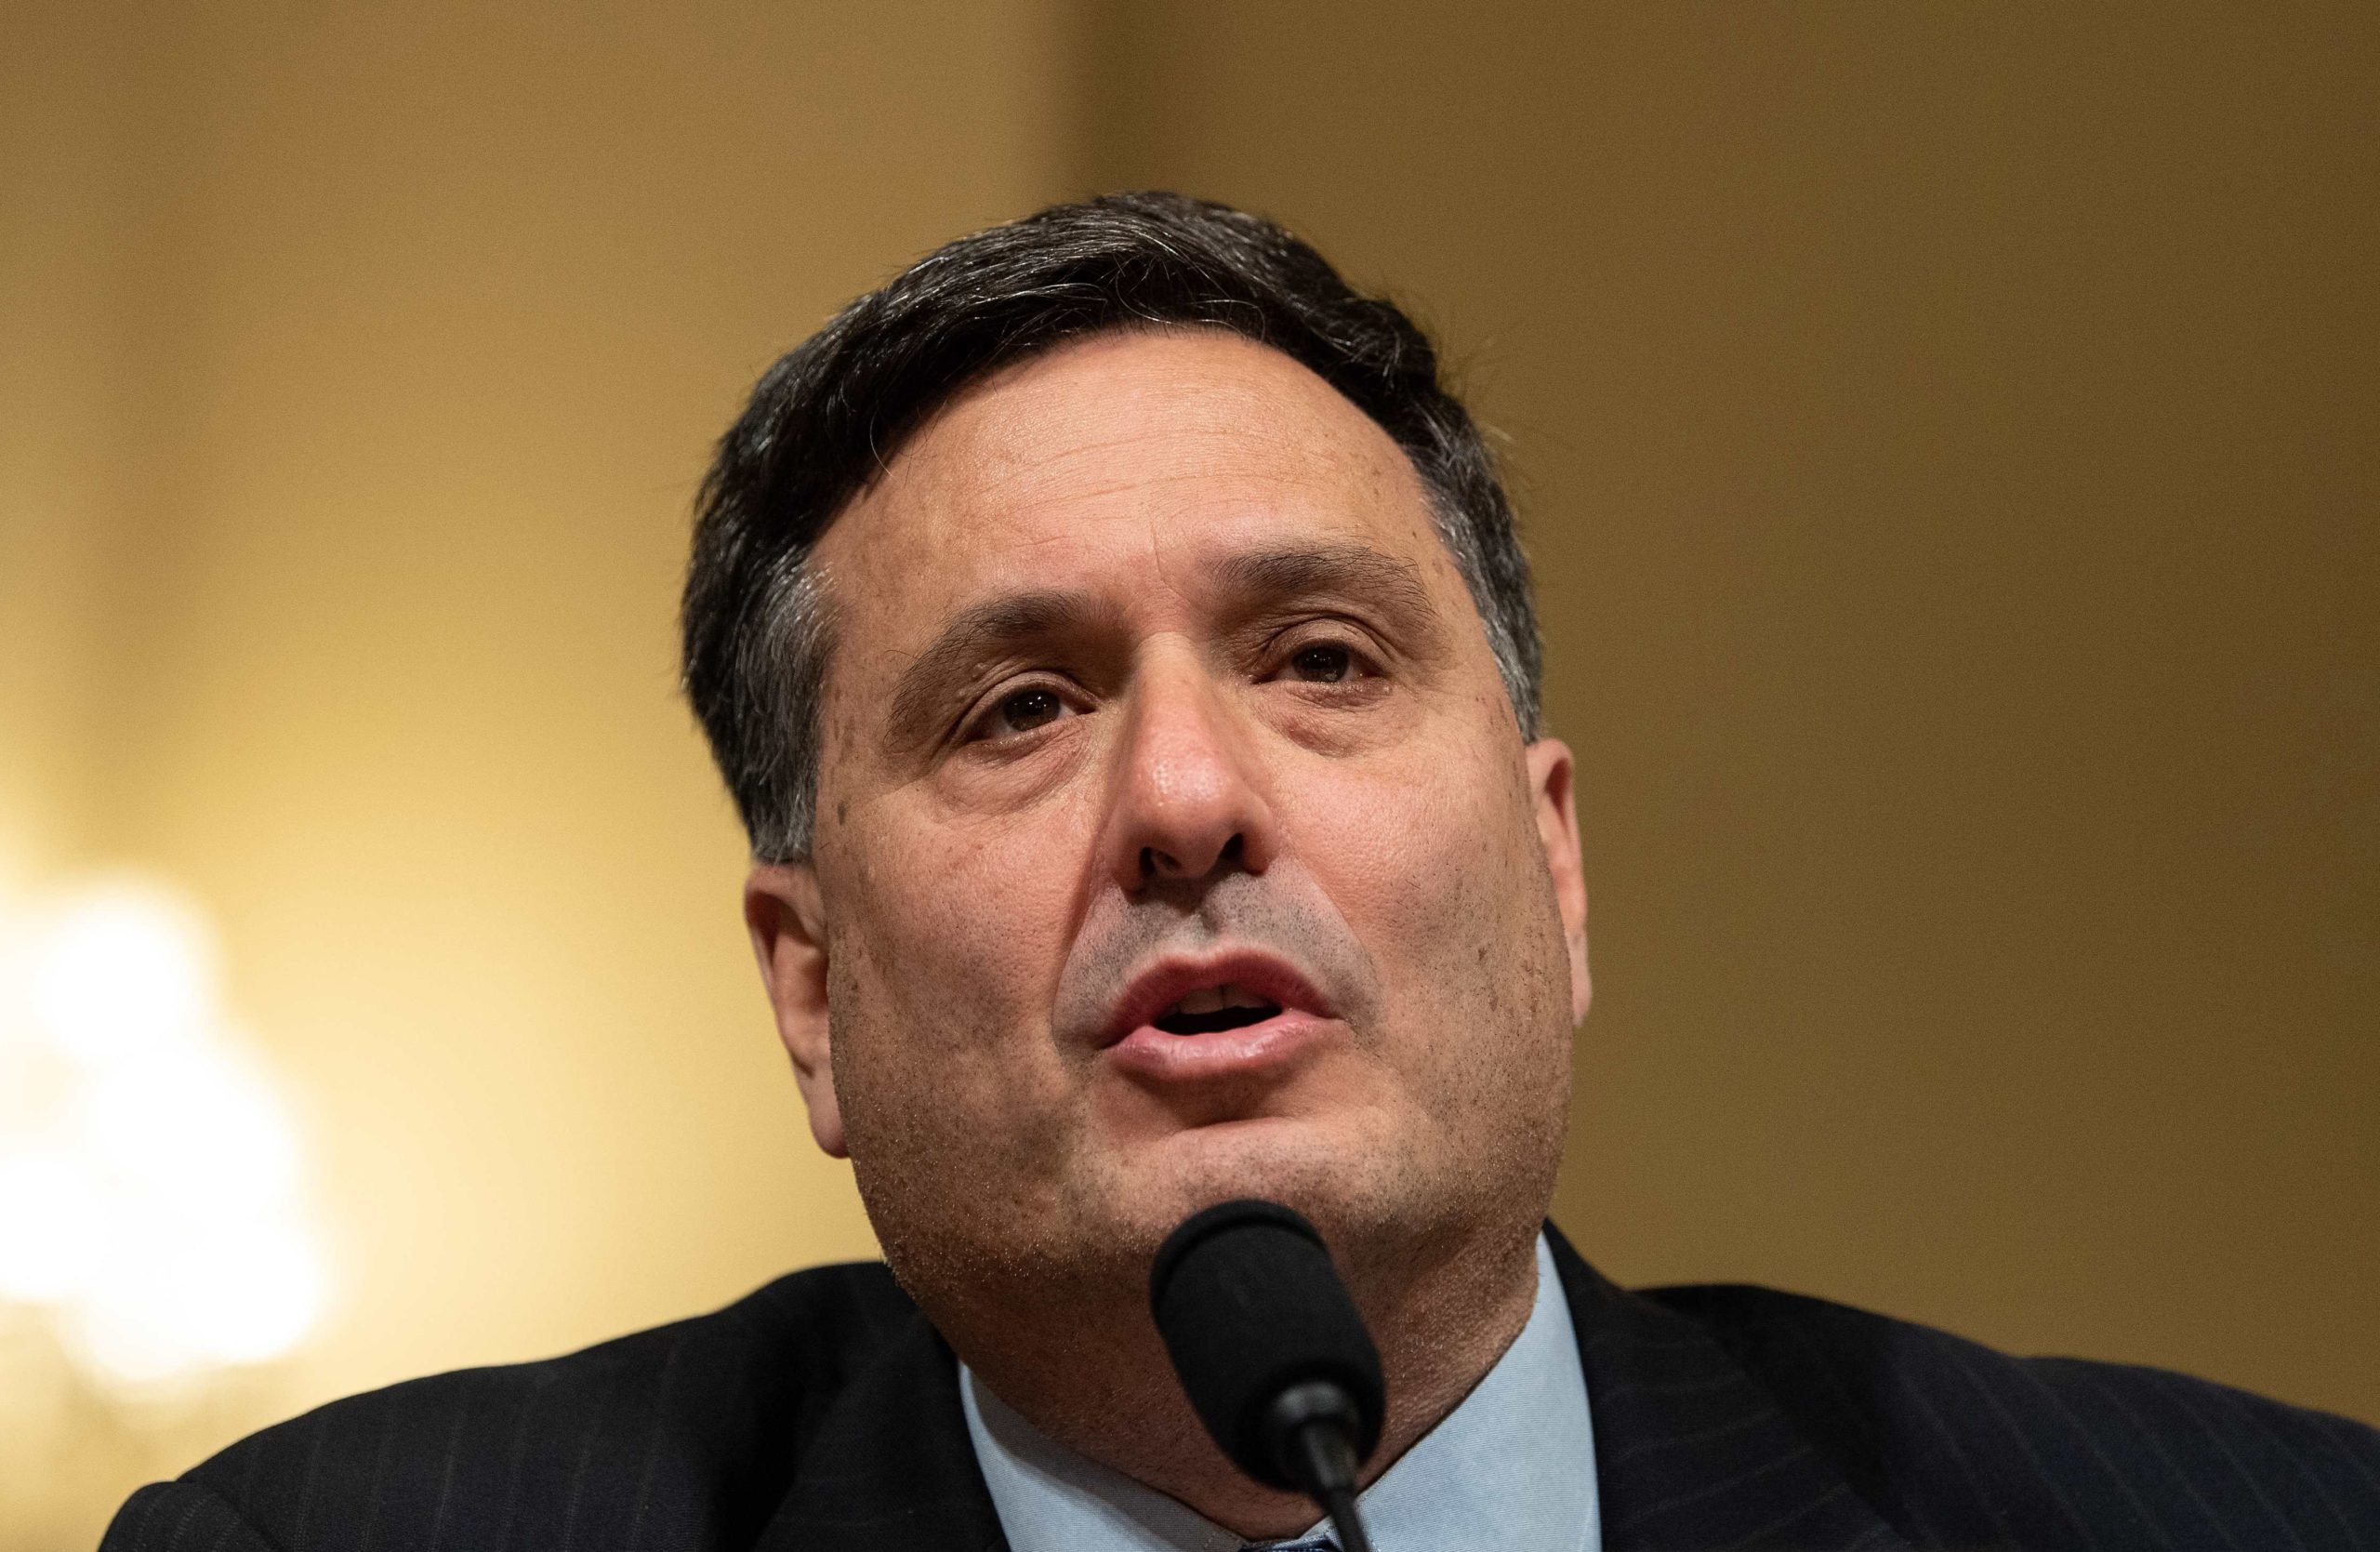 Ron Klain, former White House Ebola response coordinator, testifies before the Emergency Preparedness, Response and Recovery Subcommittee hearing on "Community Perspectives on Coronavirus Preparedness and Response" on Capitol Hill in Washington, DC, on March 10, 2020. (Photo by NICHOLAS KAMM/AFP via Getty Images)